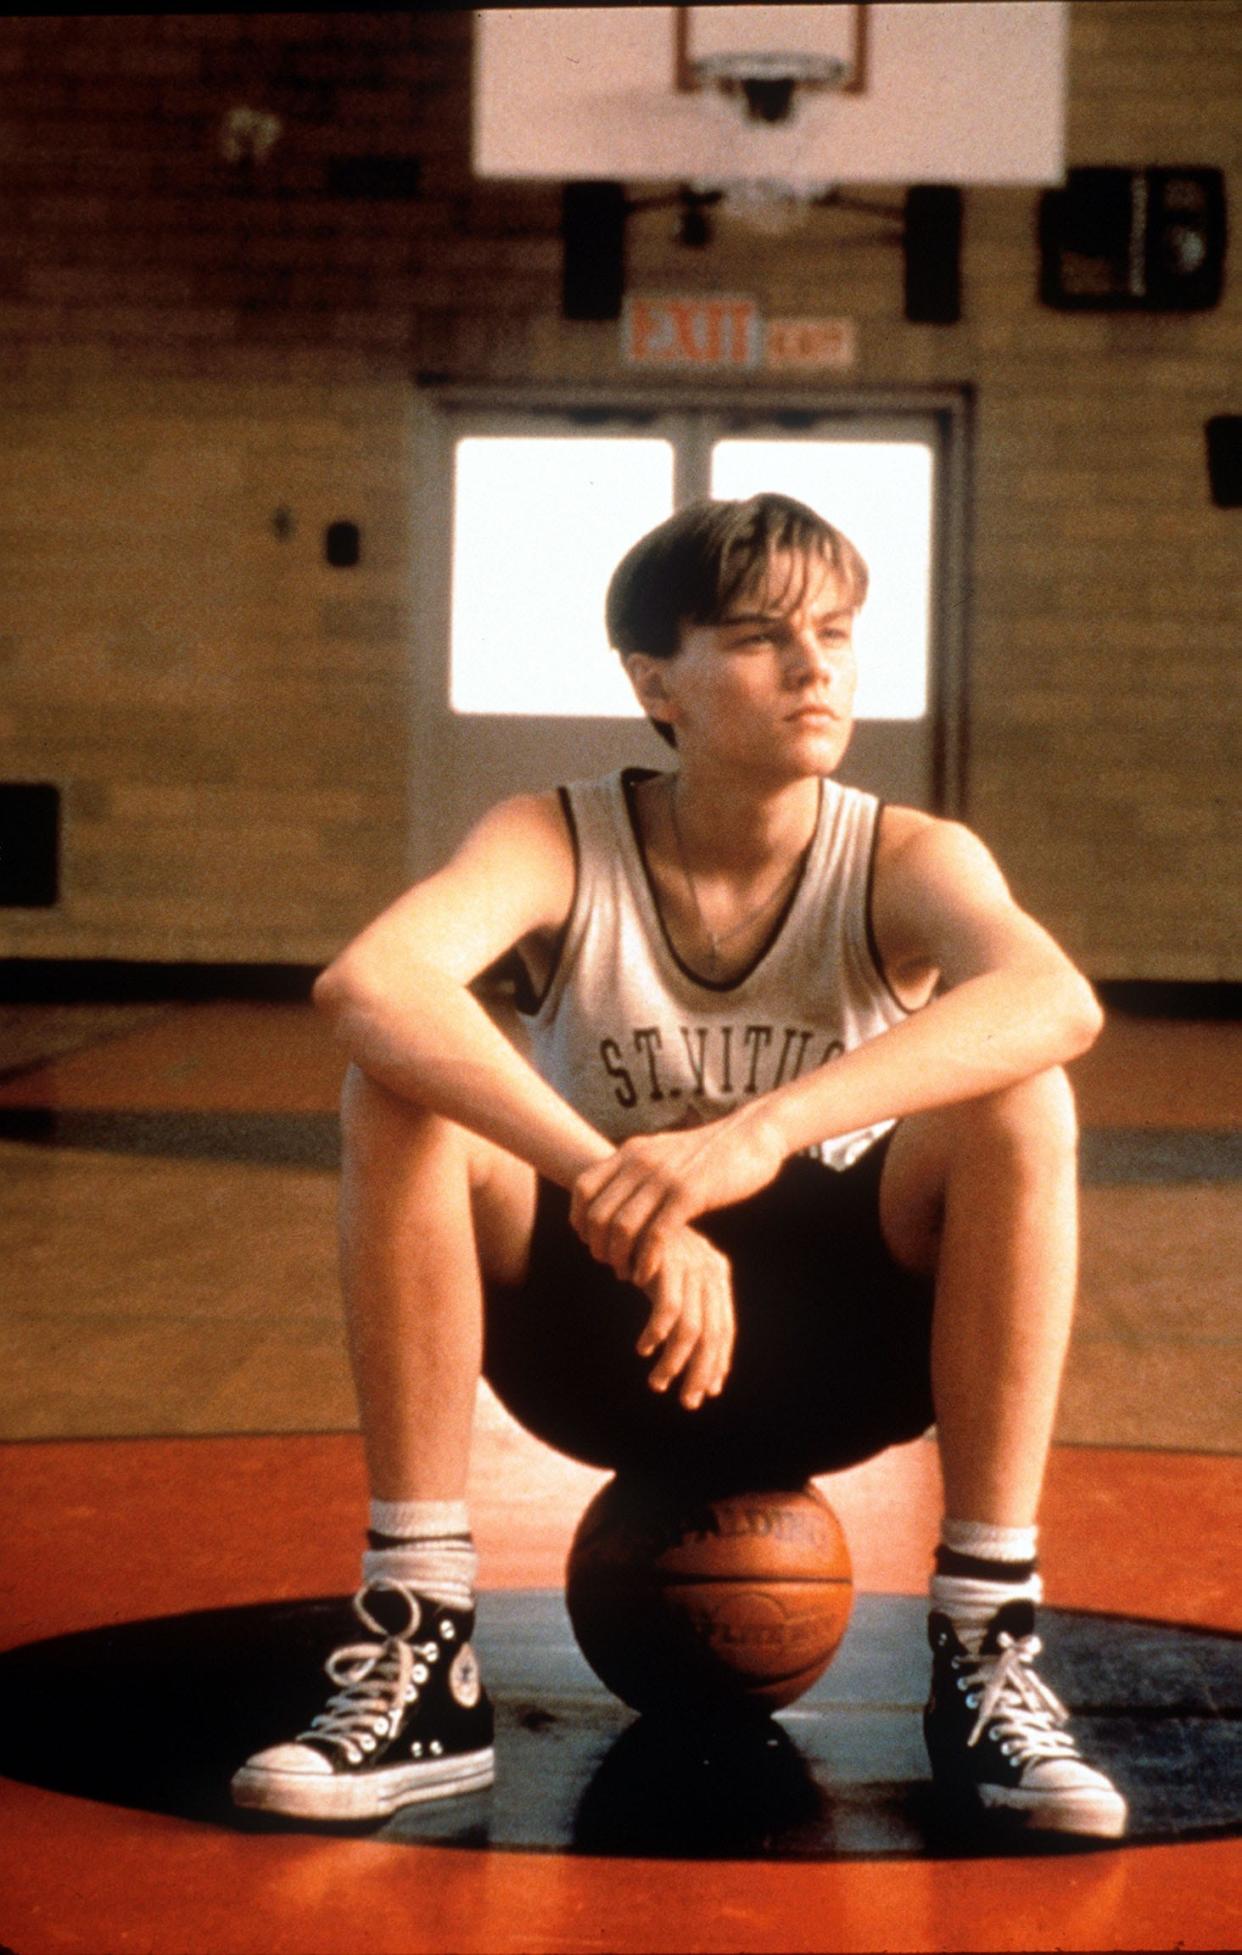 Leonardo DiCaprio plays a high school basketball player who gets involved in drugs and crime in 